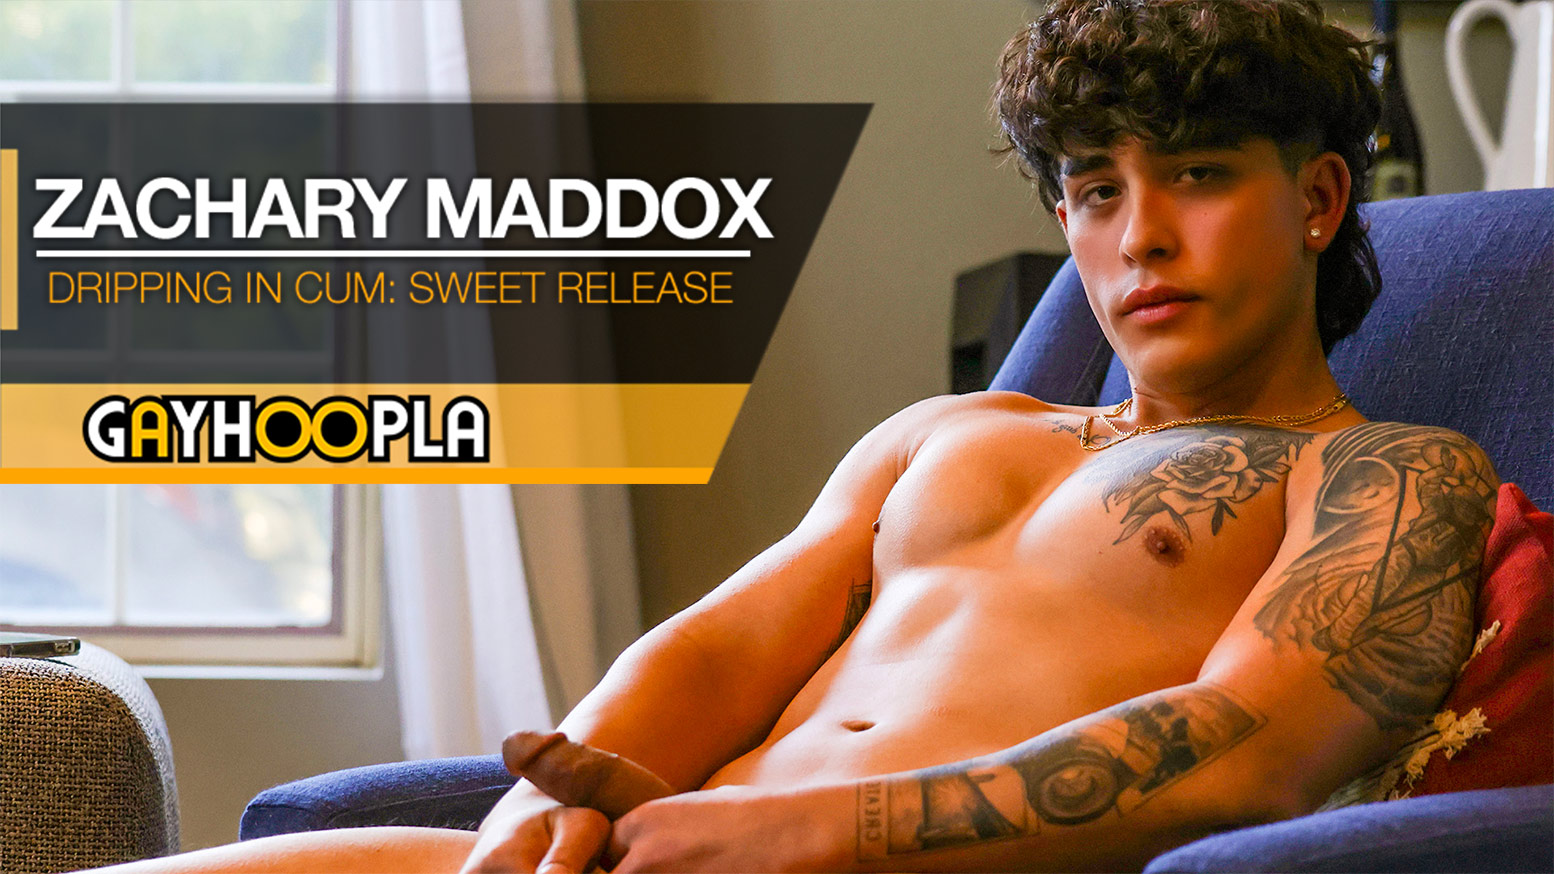 Dripping In Cum: Zachary Maddox Gets That Sweet Release!